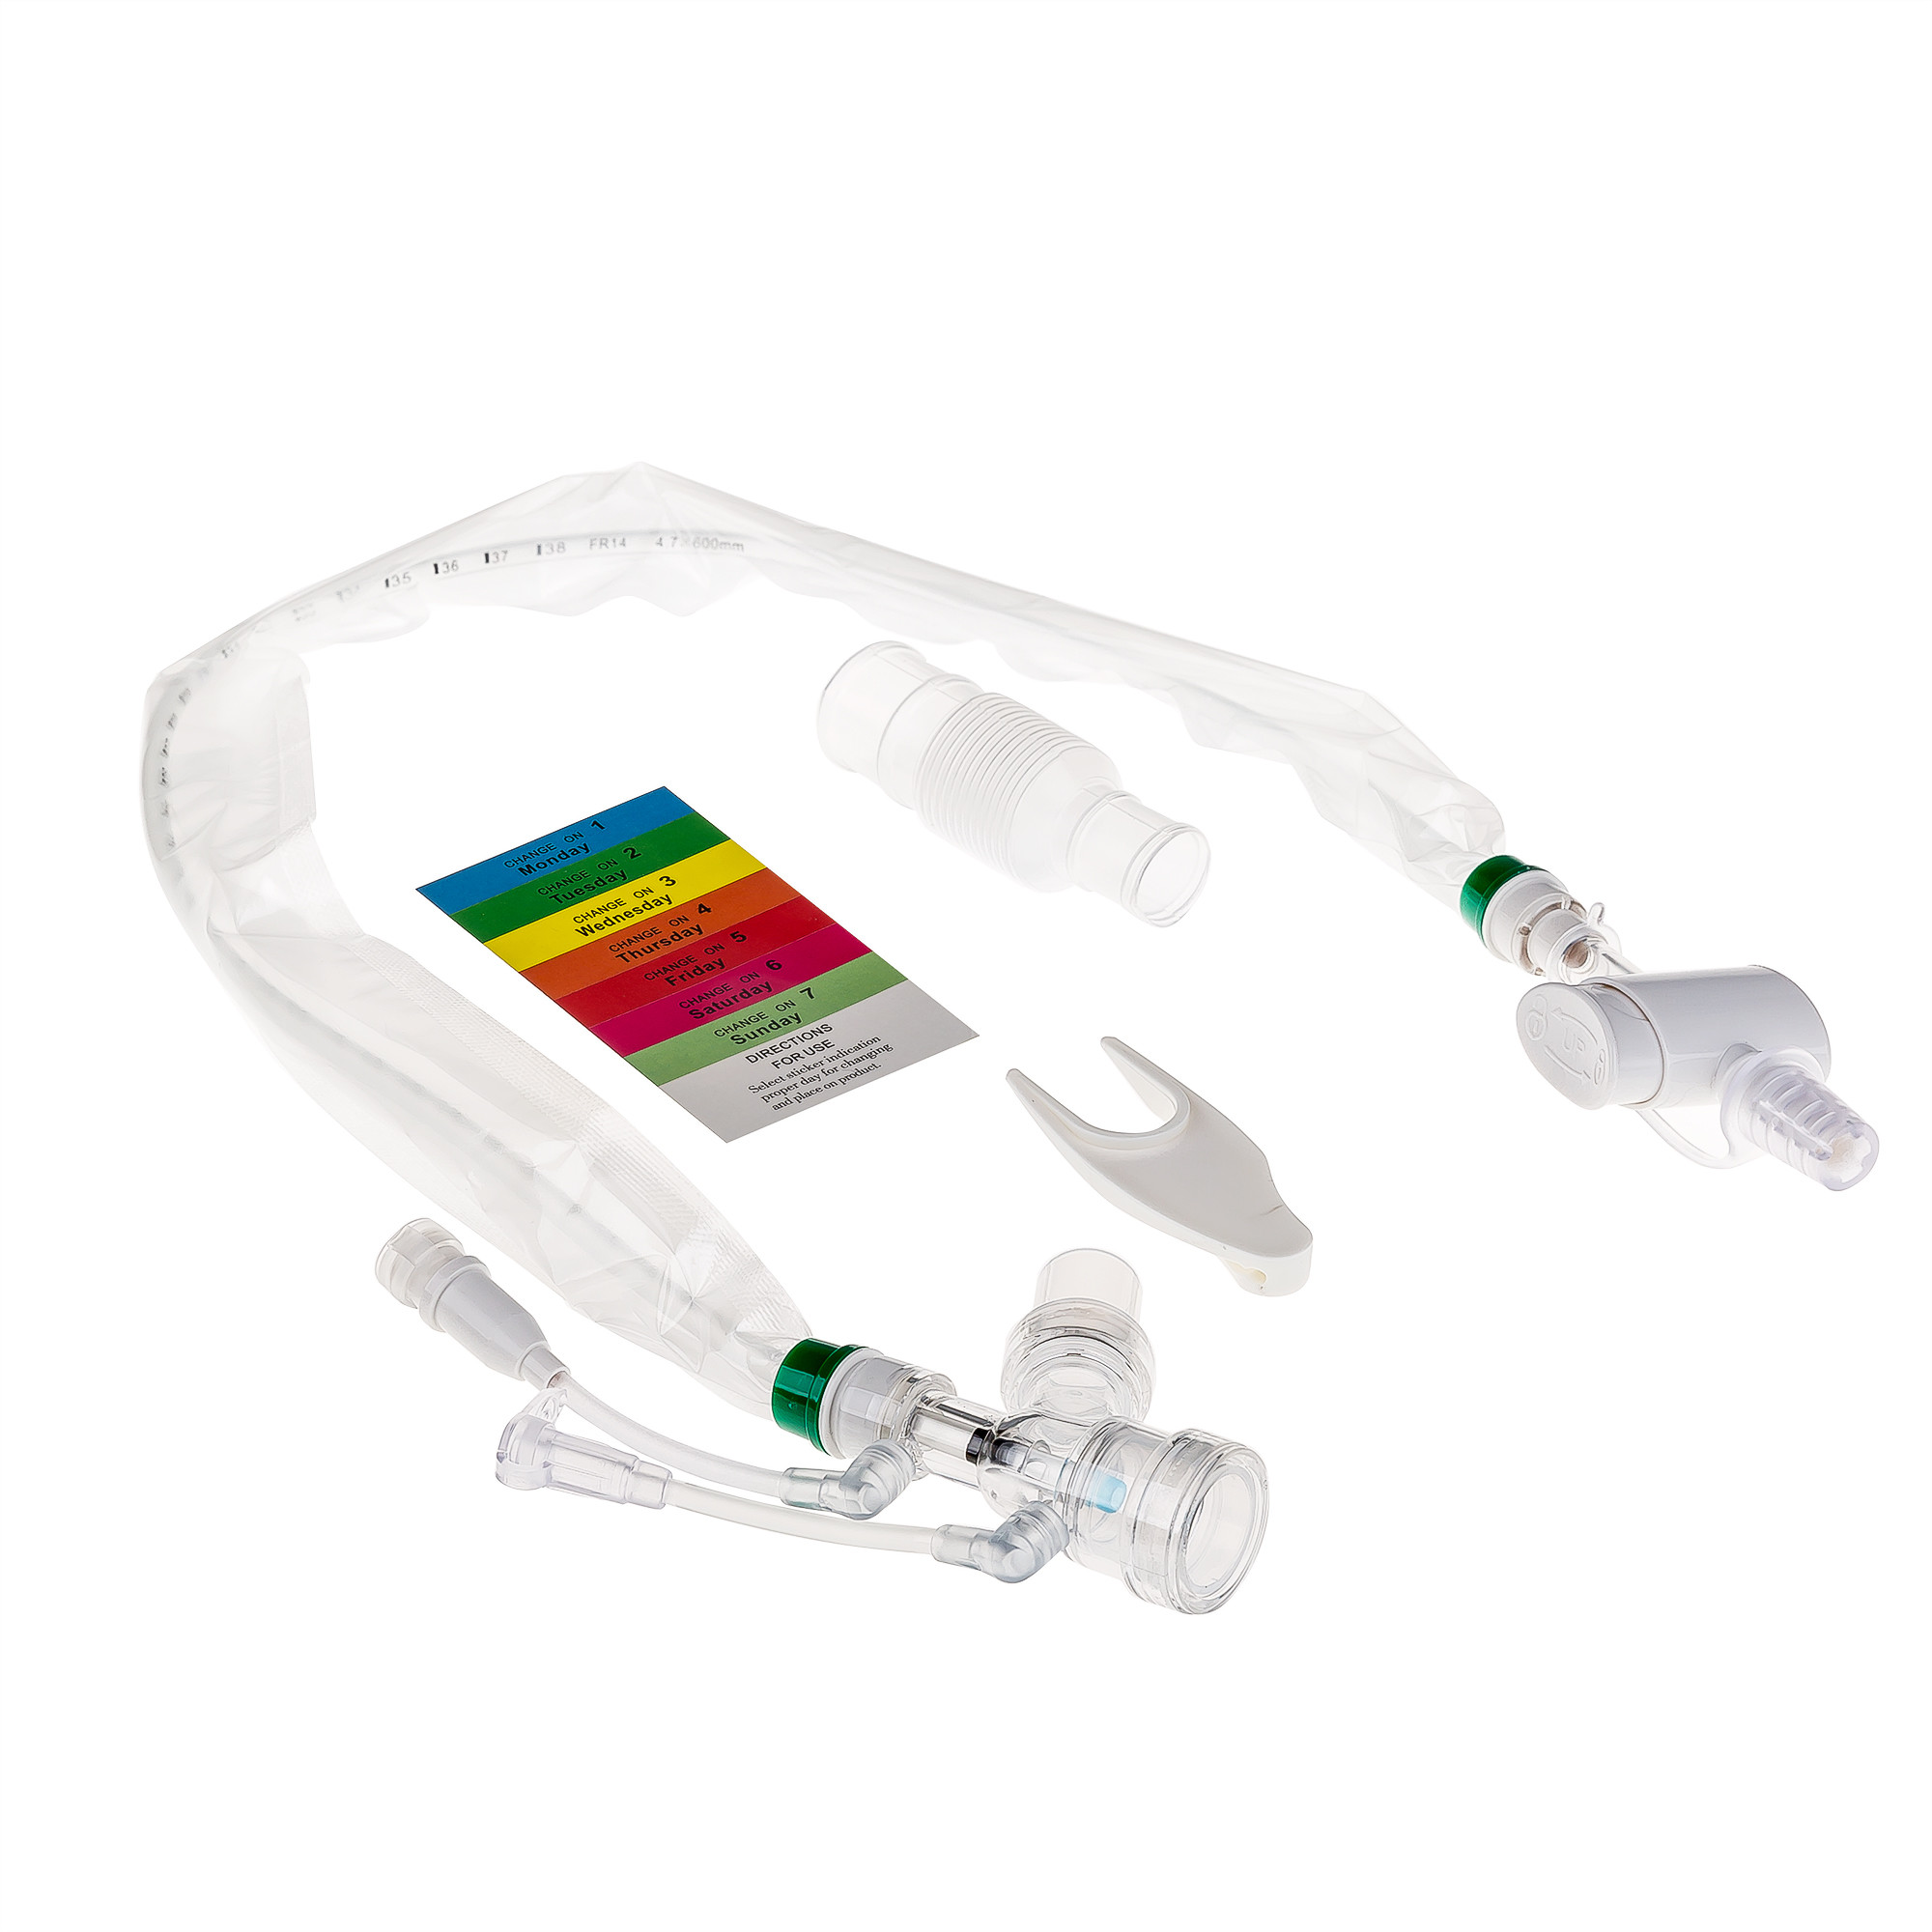  Double Swivel Elbows 7Fr Closed System PVC Suction Catheter Endotracheal Manufactures